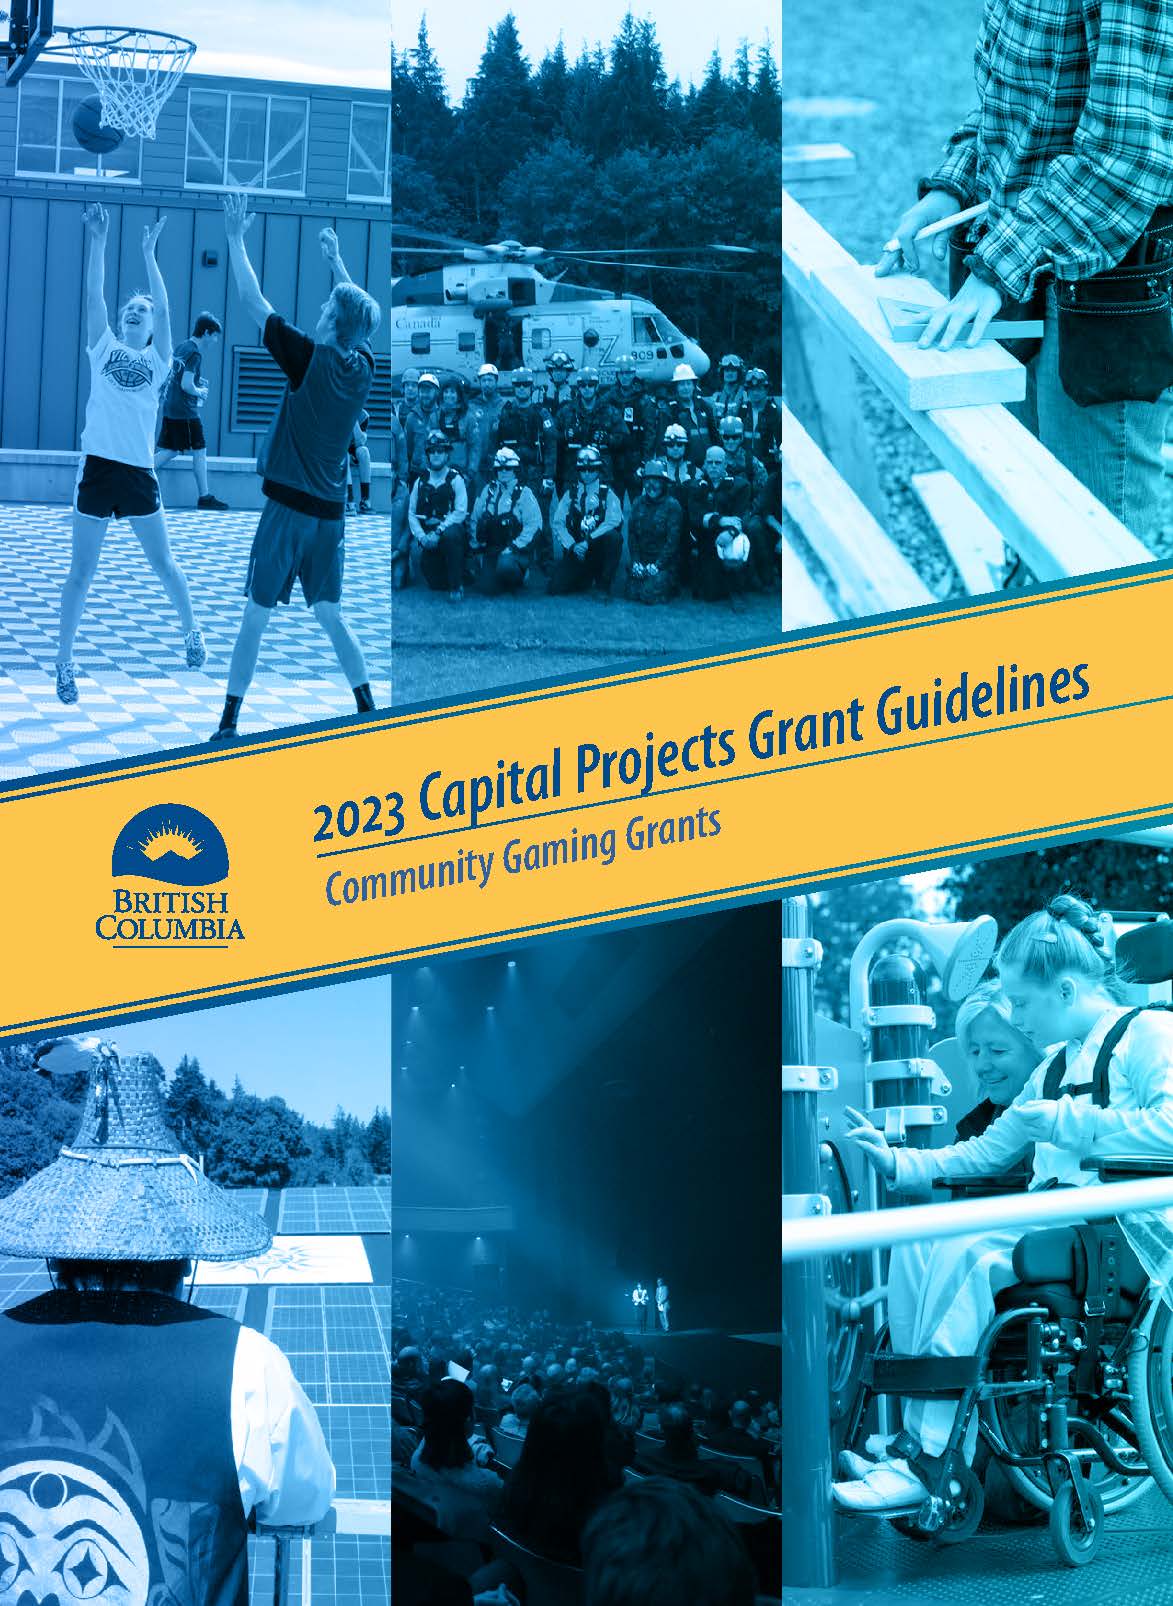 2023 Capital Projects Grant Guidelines